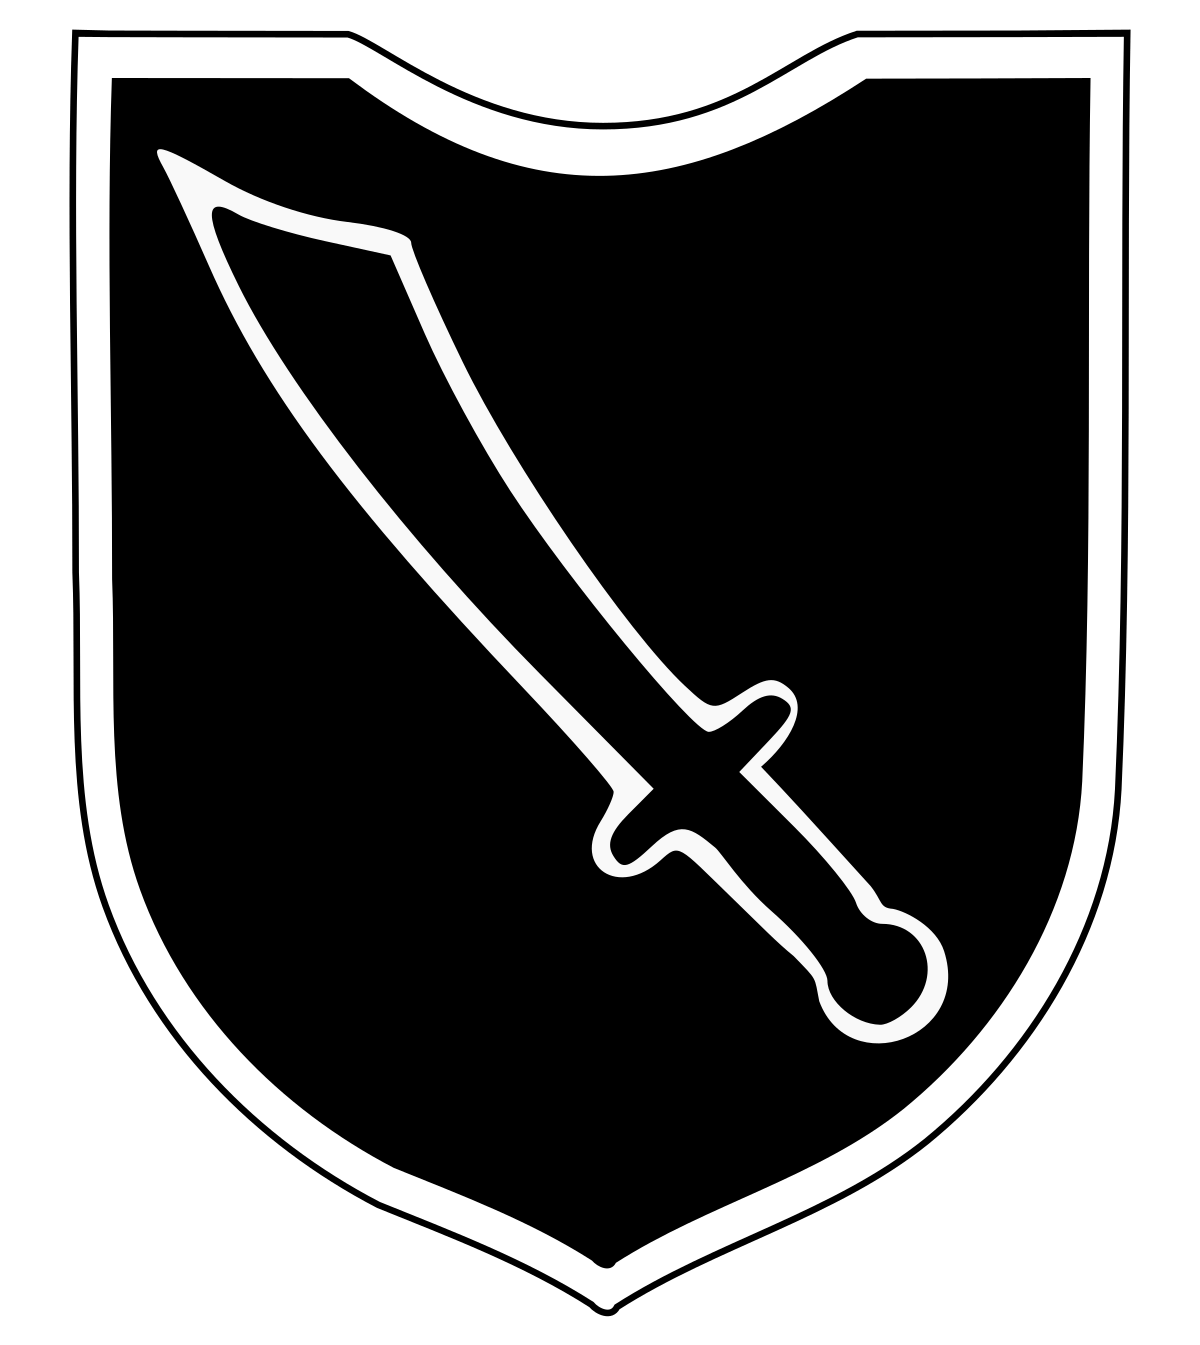 The SS Logo - 13th Waffen Mountain Division of the SS Handschar (1st Croatian ...